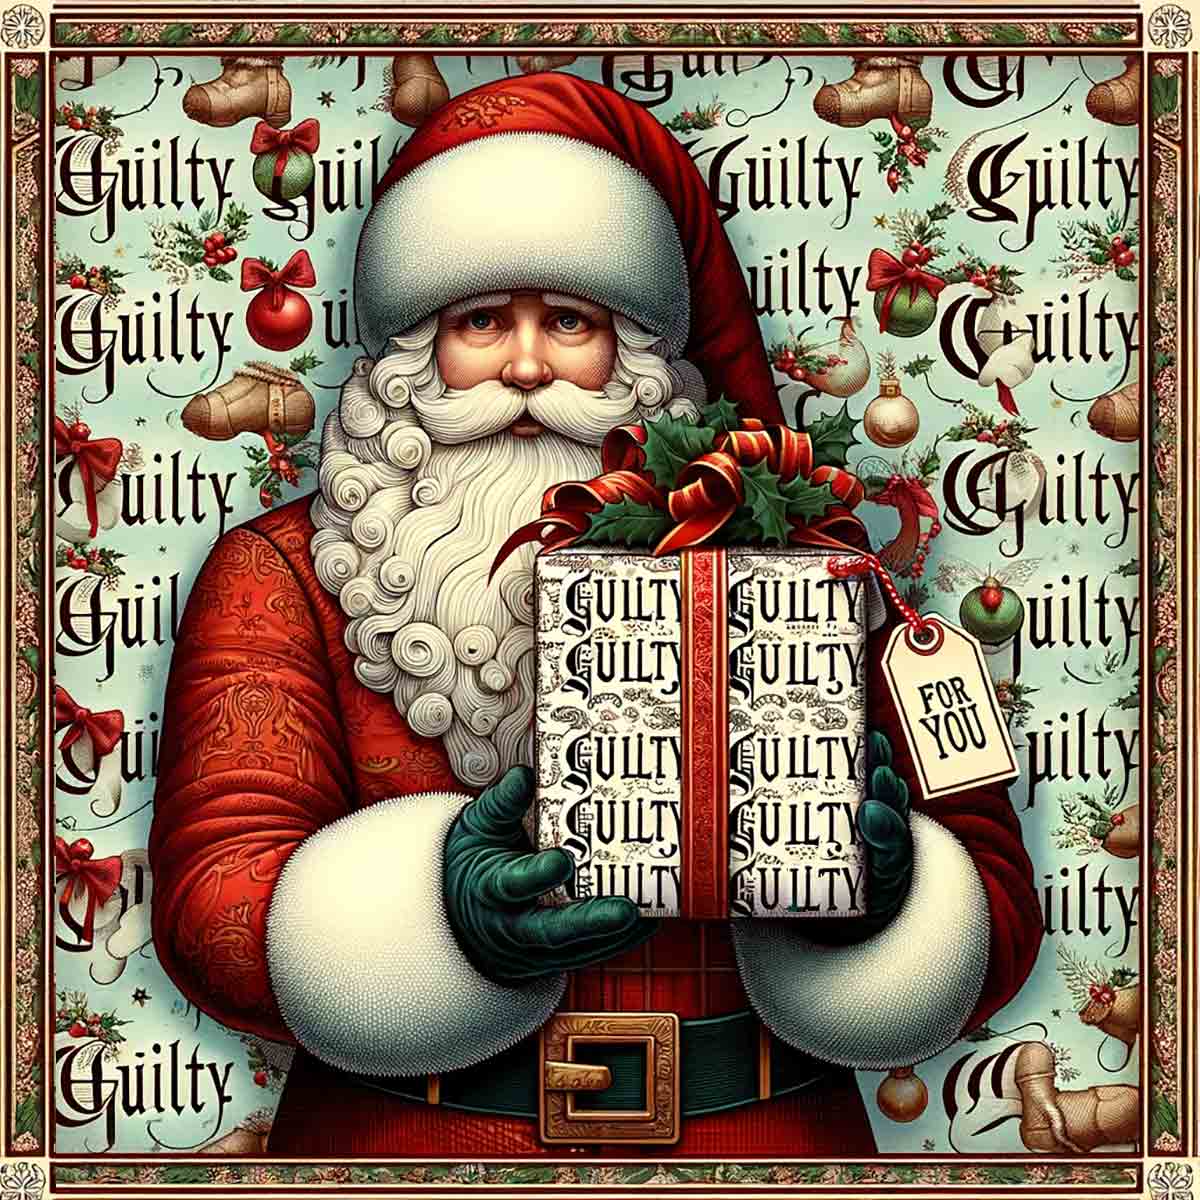 Santa Claus holding a present wrapped in paper that reads "Guilty."